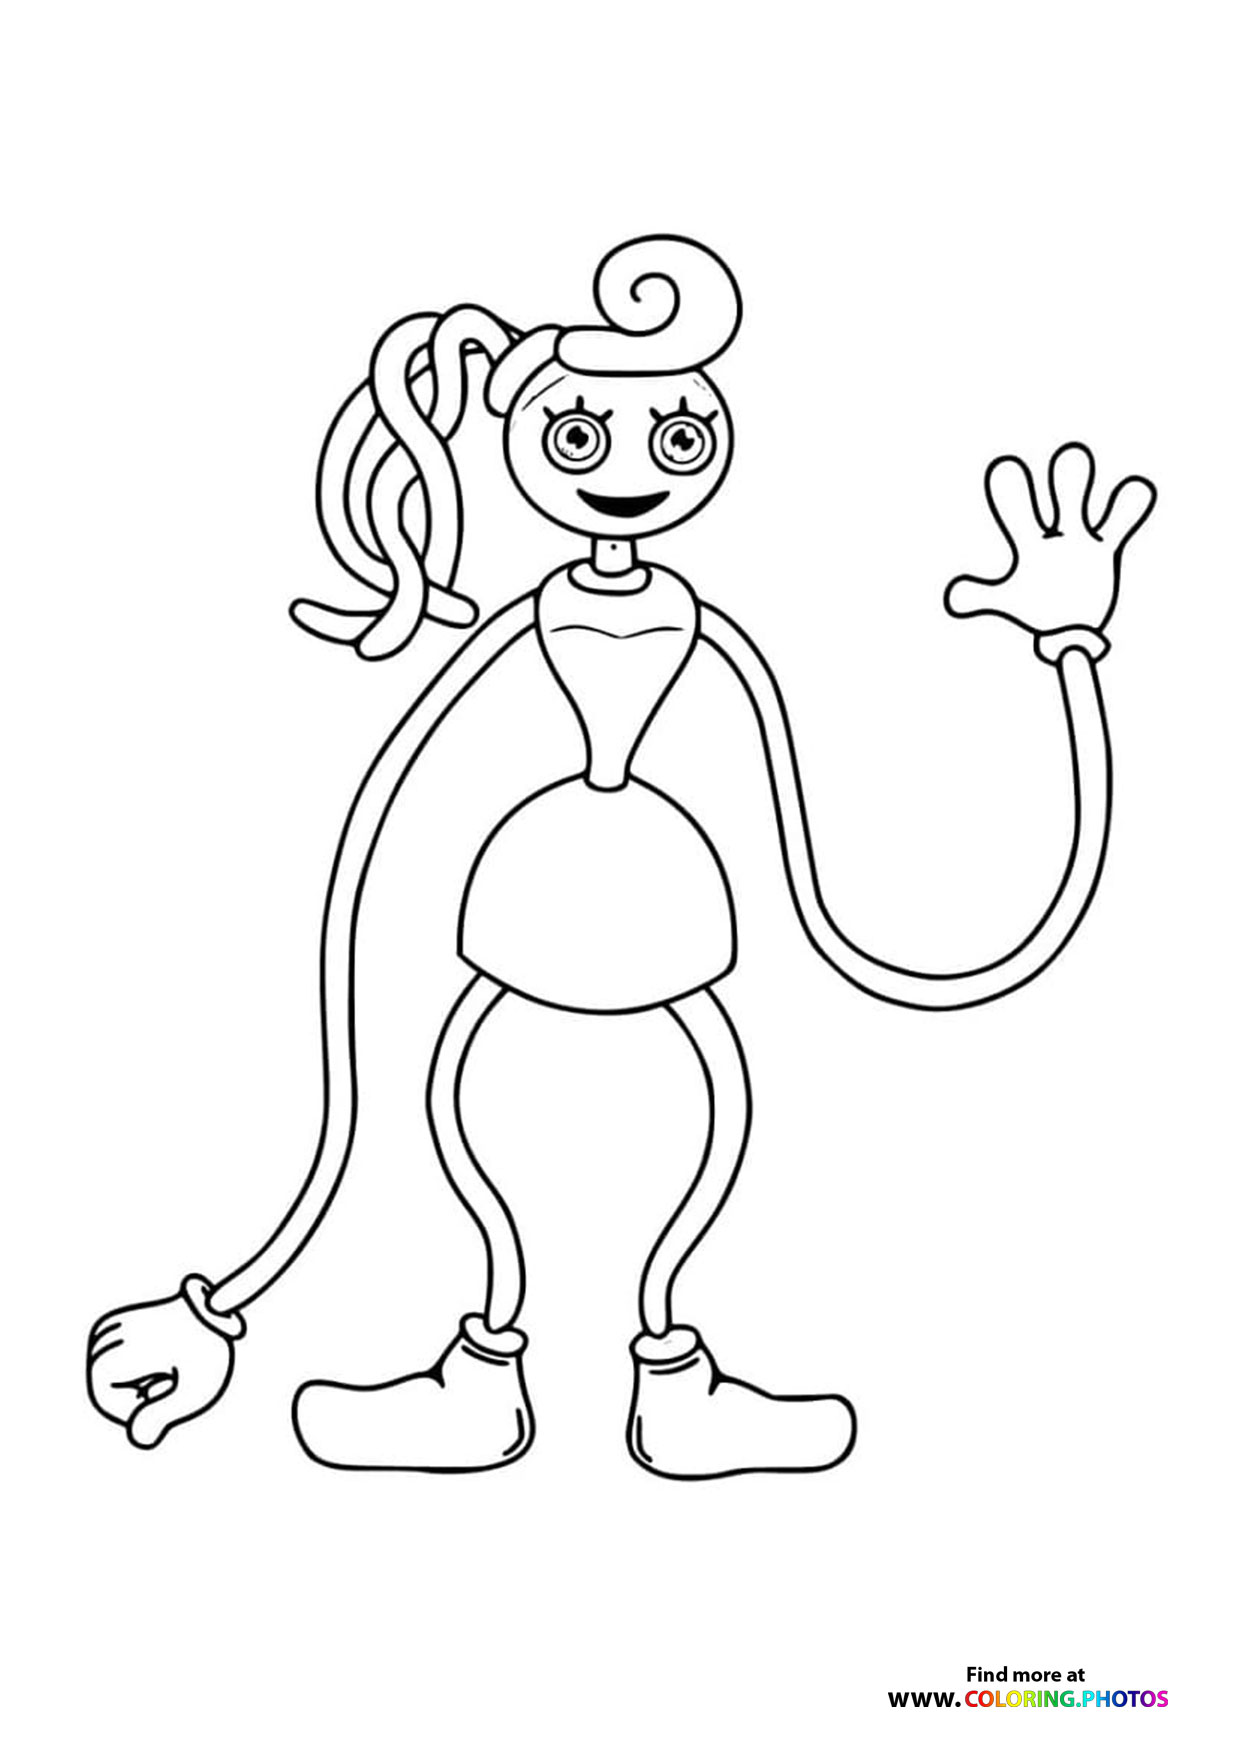 Mommy Long Legs - Coloring Pages for kids | 100% free print or download